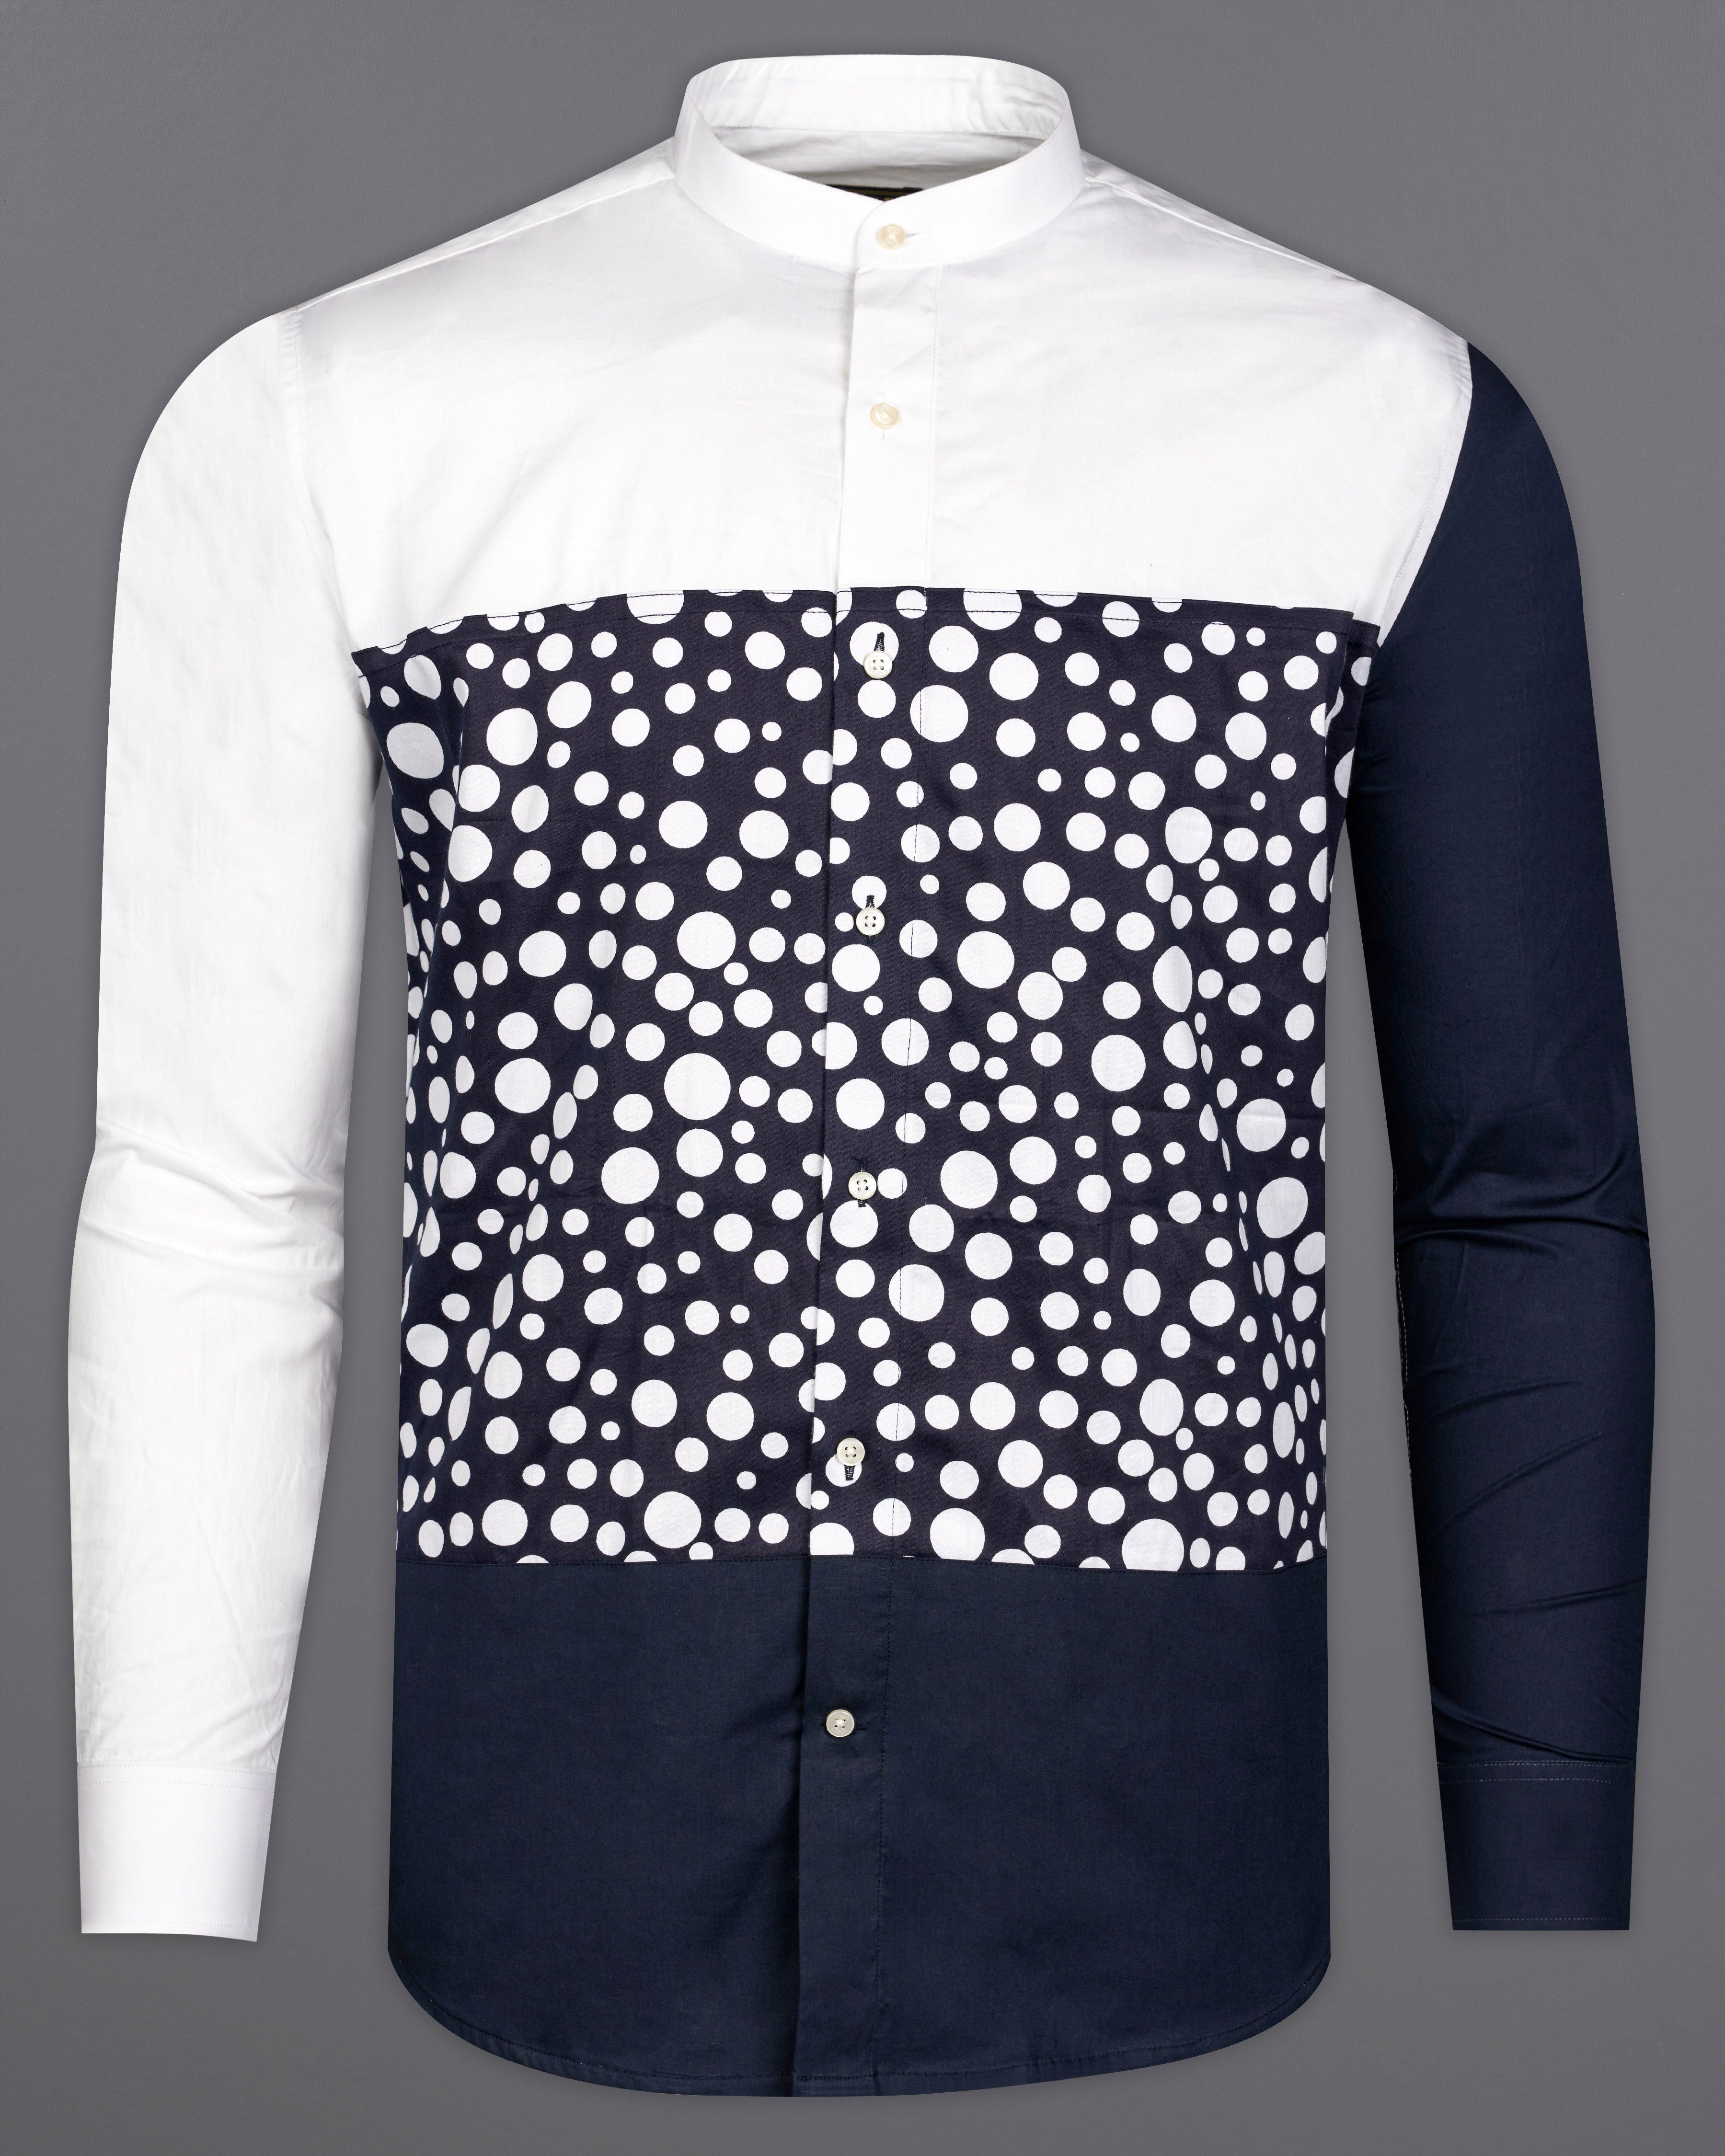 Bright White with Outer Space Blue Polka Premium Cotton Designer Shirt 9938-38, 9937-M-P229-38, 9938-39, 9937-M-P229-39, 9938-40, 9937-M-P229-40, 9938-42, 9937-M-P229-42, 9938-44, 9937-M-P229-44, 9938-46, 9937-M-P229-46, 9938-48, 9937-M-P229-48, 9938-50, 9937-M-P229-50, 9938-52, 9937-M-P229-52